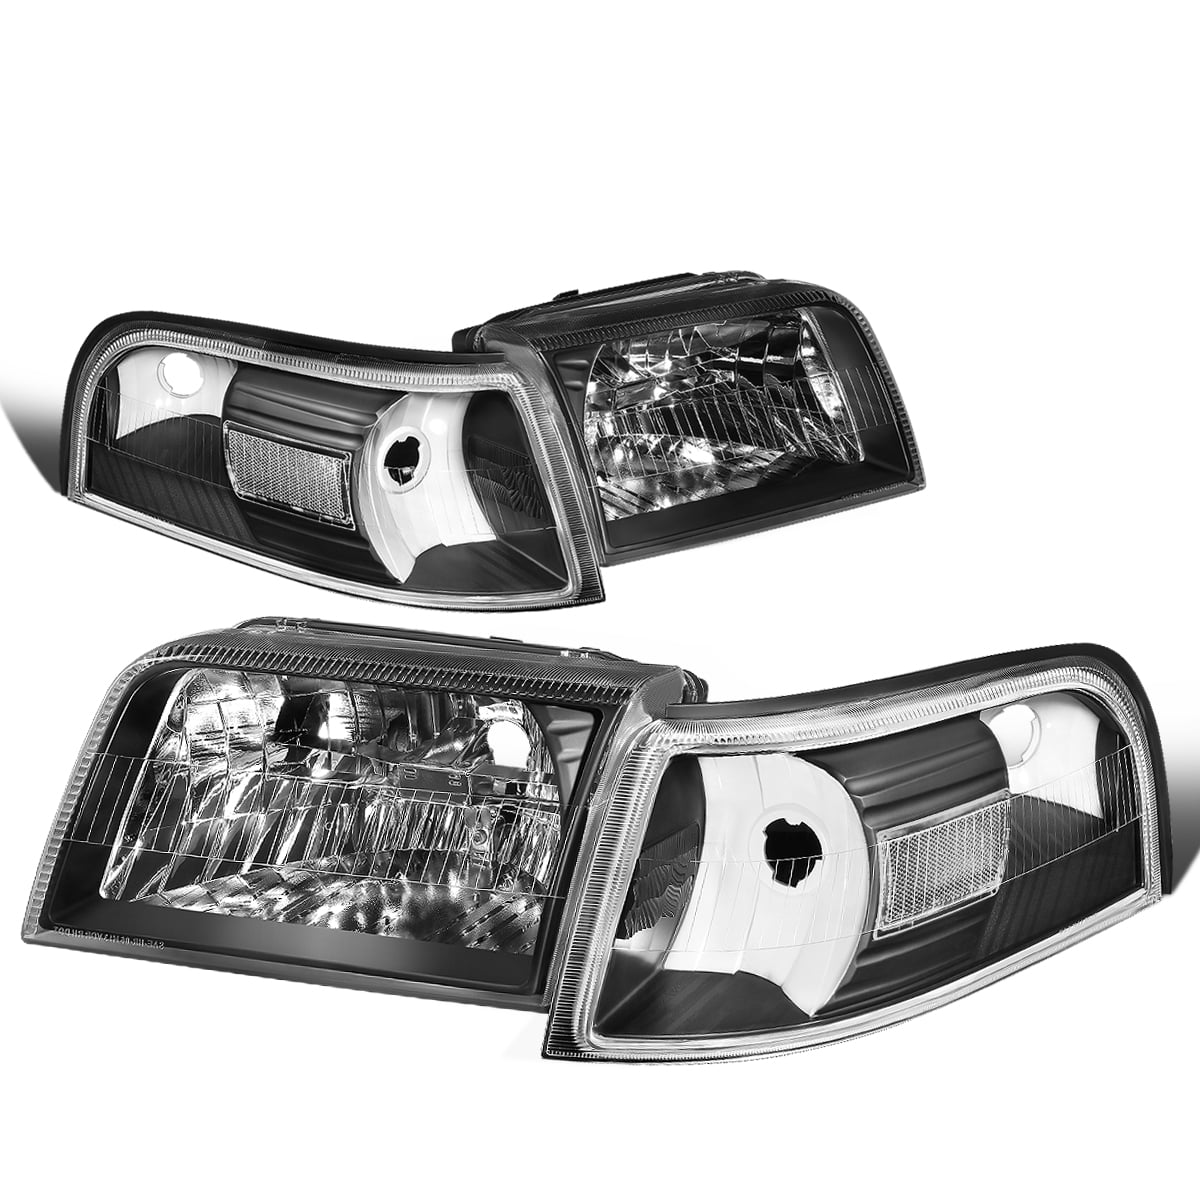 DNA Motoring Smoked amber HL-OH-065-SM-AM Pair of Headlight Assembly for 98-02 Mercury Grand Marquis 